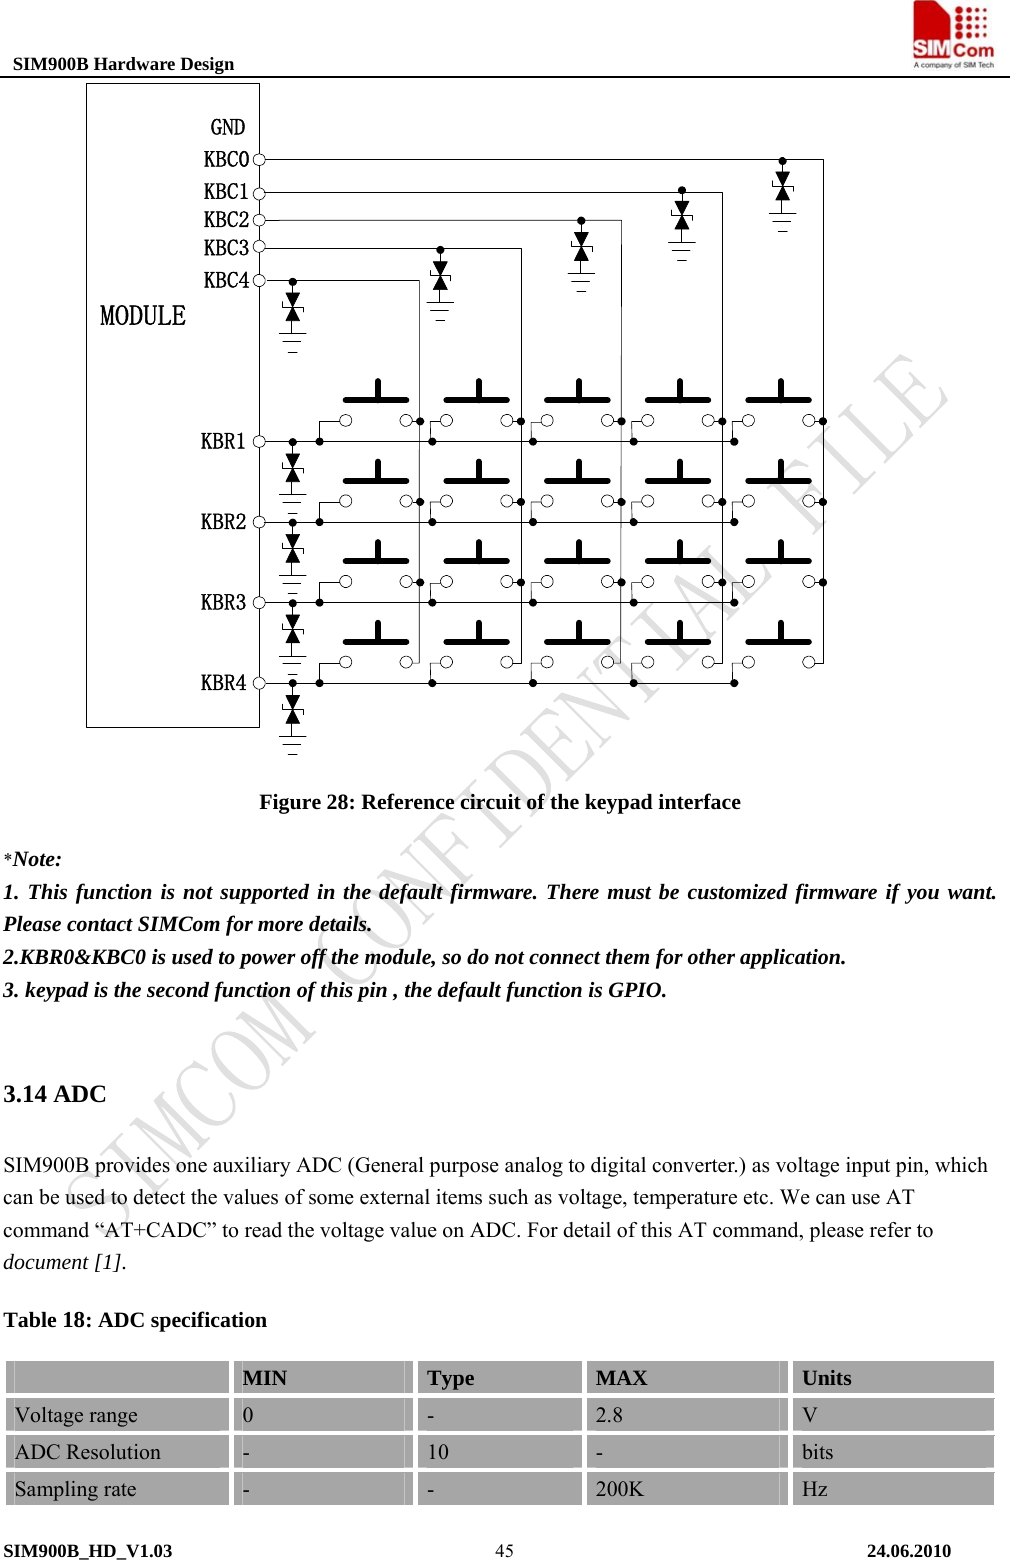  SIM900B Hardware Design                                                                          KBR4KBR3KBR2KBR1KBC0KBC1KBC2KBC3KBC4GNDMODULE Figure 28: Reference circuit of the keypad interface *Note: 1. This function is not supported in the default firmware. There must be customized firmware if you want. Please contact SIMCom for more details. 2.KBR0&amp;KBC0 is used to power off the module, so do not connect them for other application. 3. keypad is the second function of this pin , the default function is GPIO.  3.14 ADC SIM900B provides one auxiliary ADC (General purpose analog to digital converter.) as voltage input pin, which can be used to detect the values of some external items such as voltage, temperature etc. We can use AT command “AT+CADC” to read the voltage value on ADC. For detail of this AT command, please refer to document [1]. Table 18: ADC specification  MIN  Type  MAX  Units Voltage range  0  -  2.8  V ADC Resolution  -  10  -  bits Sampling rate  -  -  200K  Hz SIM900B_HD_V1.03                                                                          24.06.2010  45